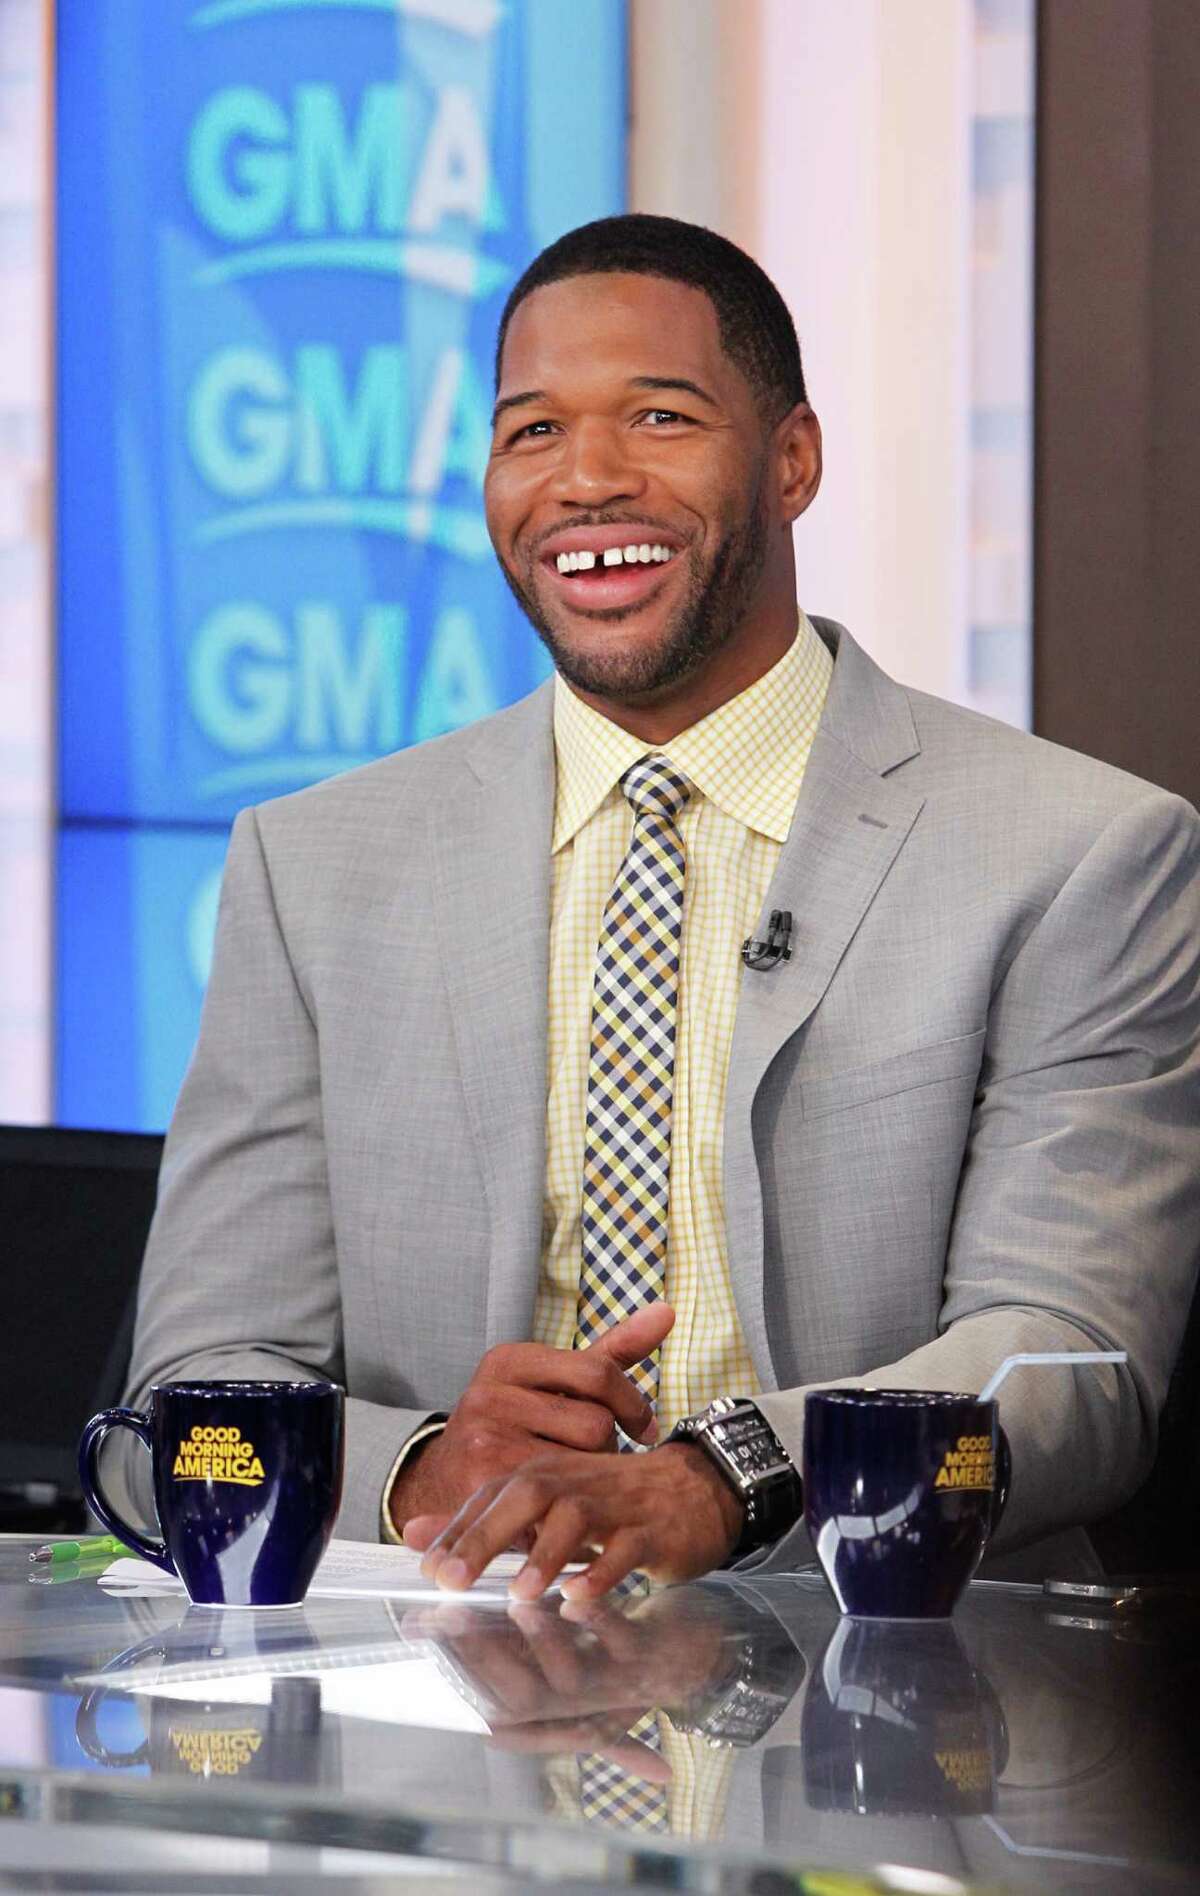 Michael Strahan, NFL The Westbury and Texas Southern alum went out on top with the Giants, winning the Super Bowl in his final game. He's gone on to TV stardom as a Fox NFL analyst, the co-host of "Live with Kelly and Michael" until his recent high-profile departure and now a full-time role on "Good Morning America."